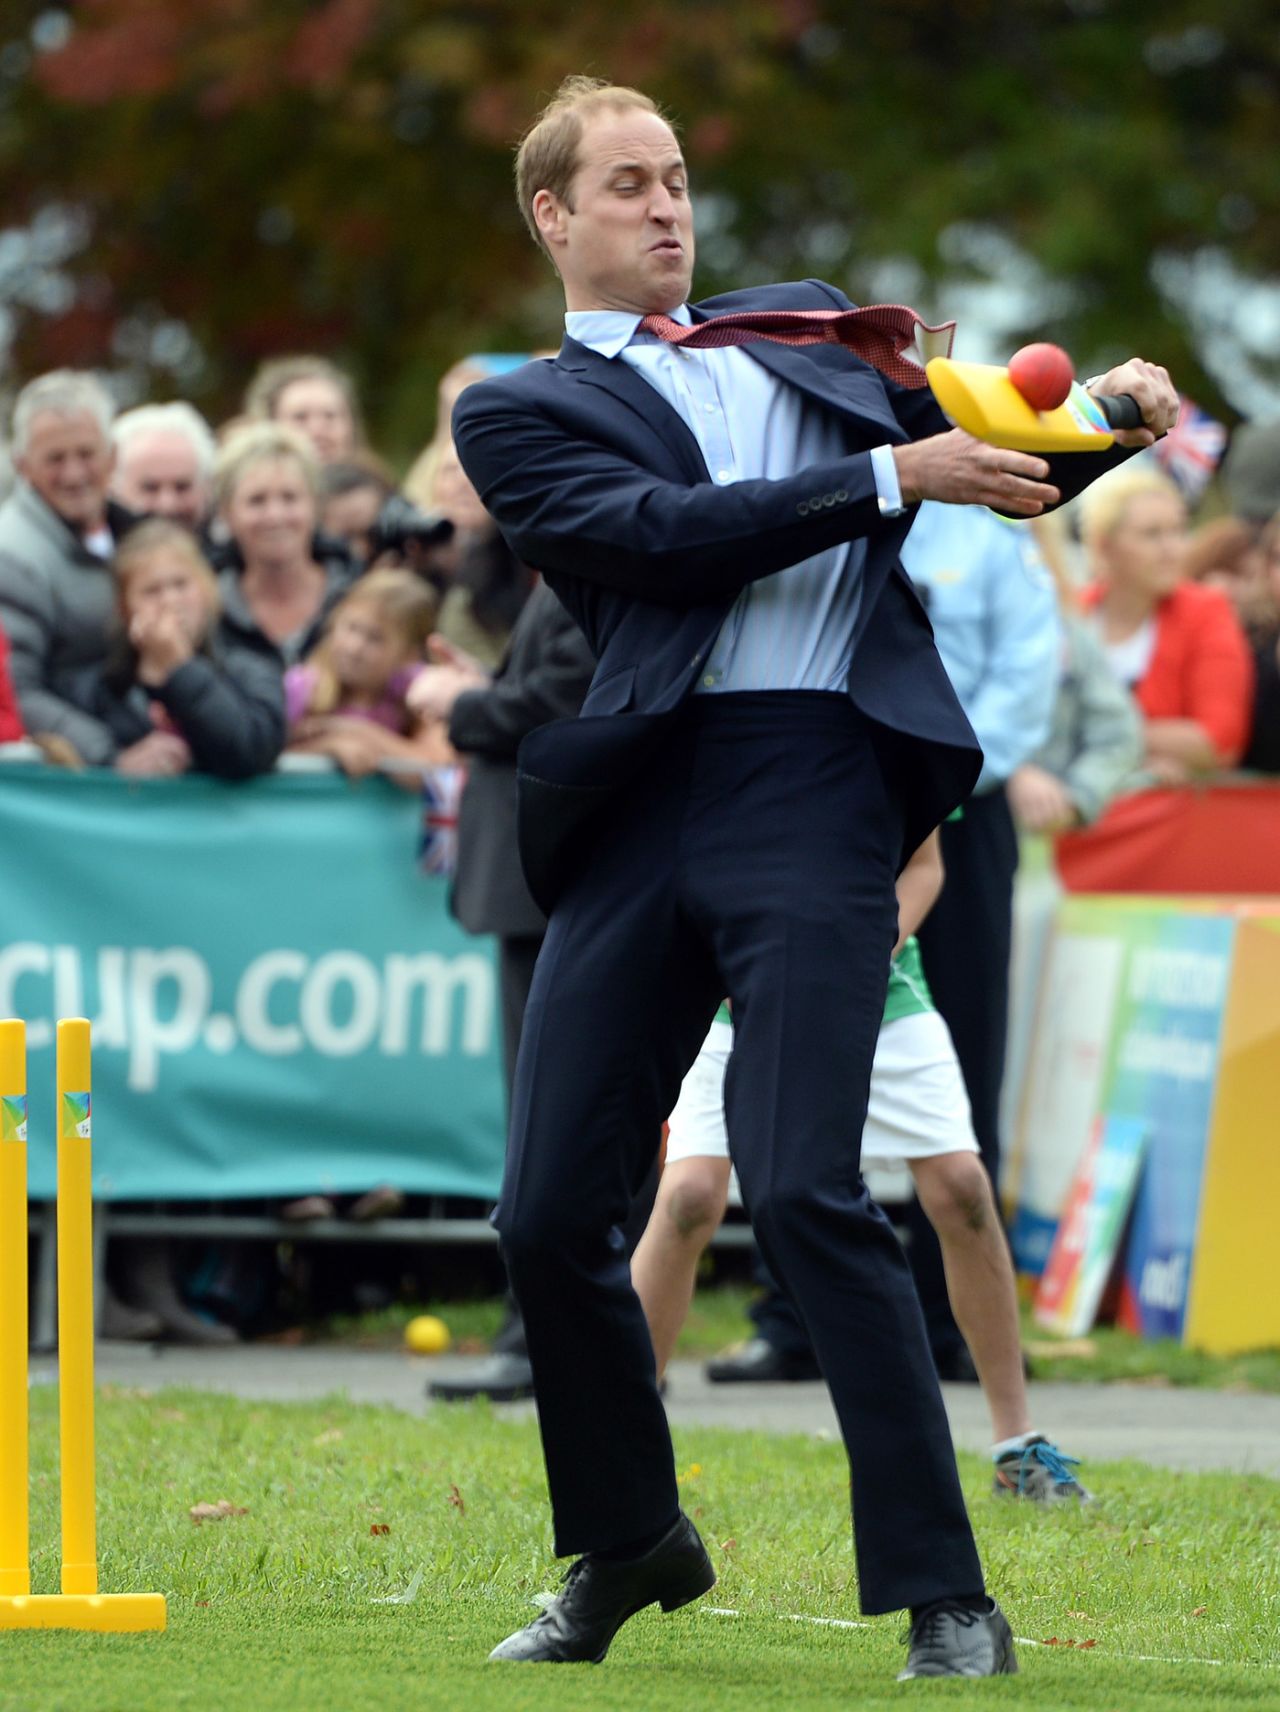 Prince William plays a pull, during a visit to Christchurch to begin the countdown to the 2015 World Cup, during the countdown to the 2015 World Cup, Christchurch, April 14, 2014